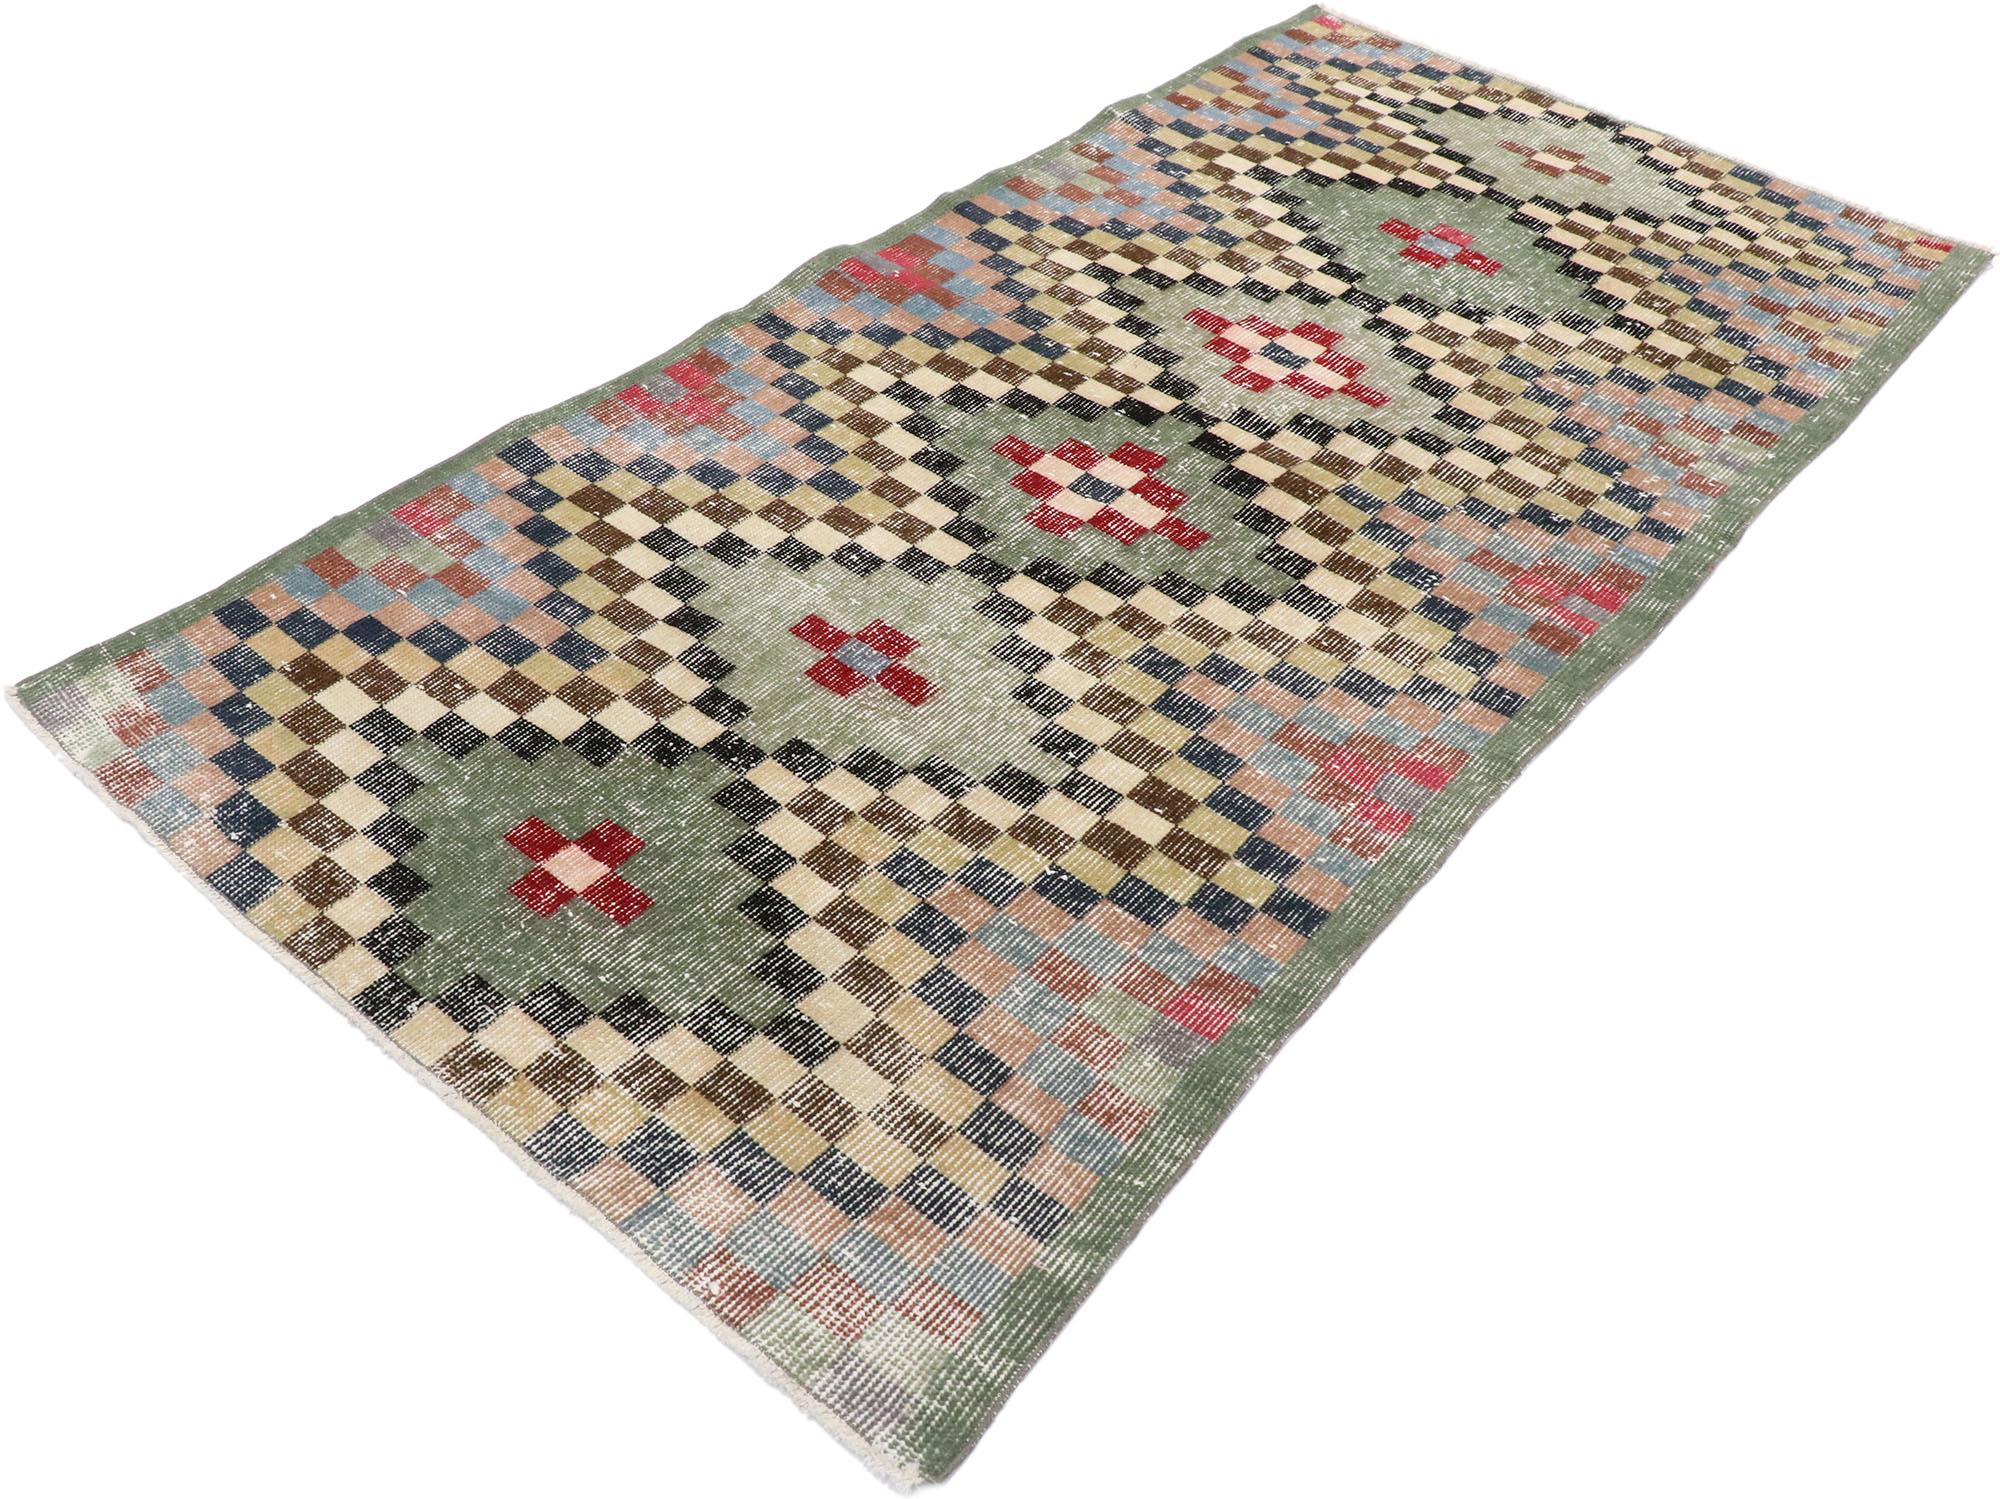 53317, distressed vintage Turkish Sivas rug with rustic Mid-Century Modern Cubist style. This hand knotted wool distressed vintage Turkish Sivas rug features an all-over checkered stacked diamond pattern comprised of rows of multicolored cubes. Each